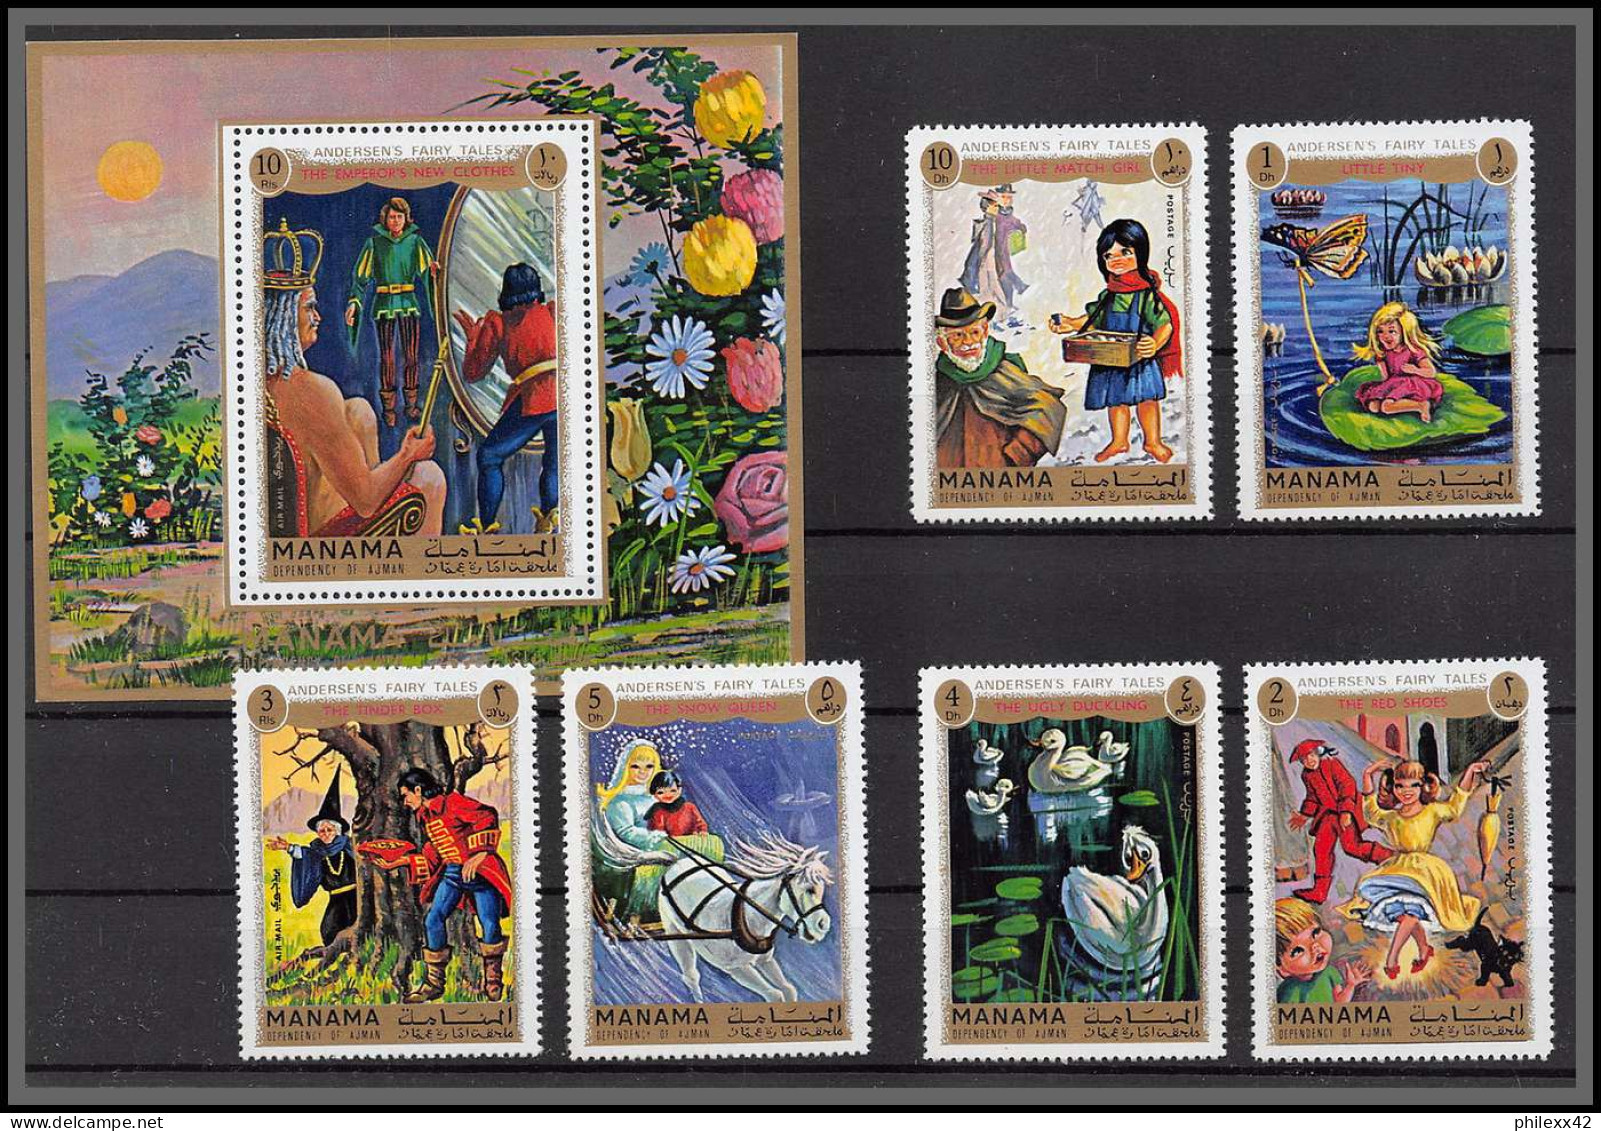 Manama - 3174h/ N° 893/898 A + Bloc 173 A Contes Fairy Tales Andersen ** MNH - Contes, Fables & Légendes